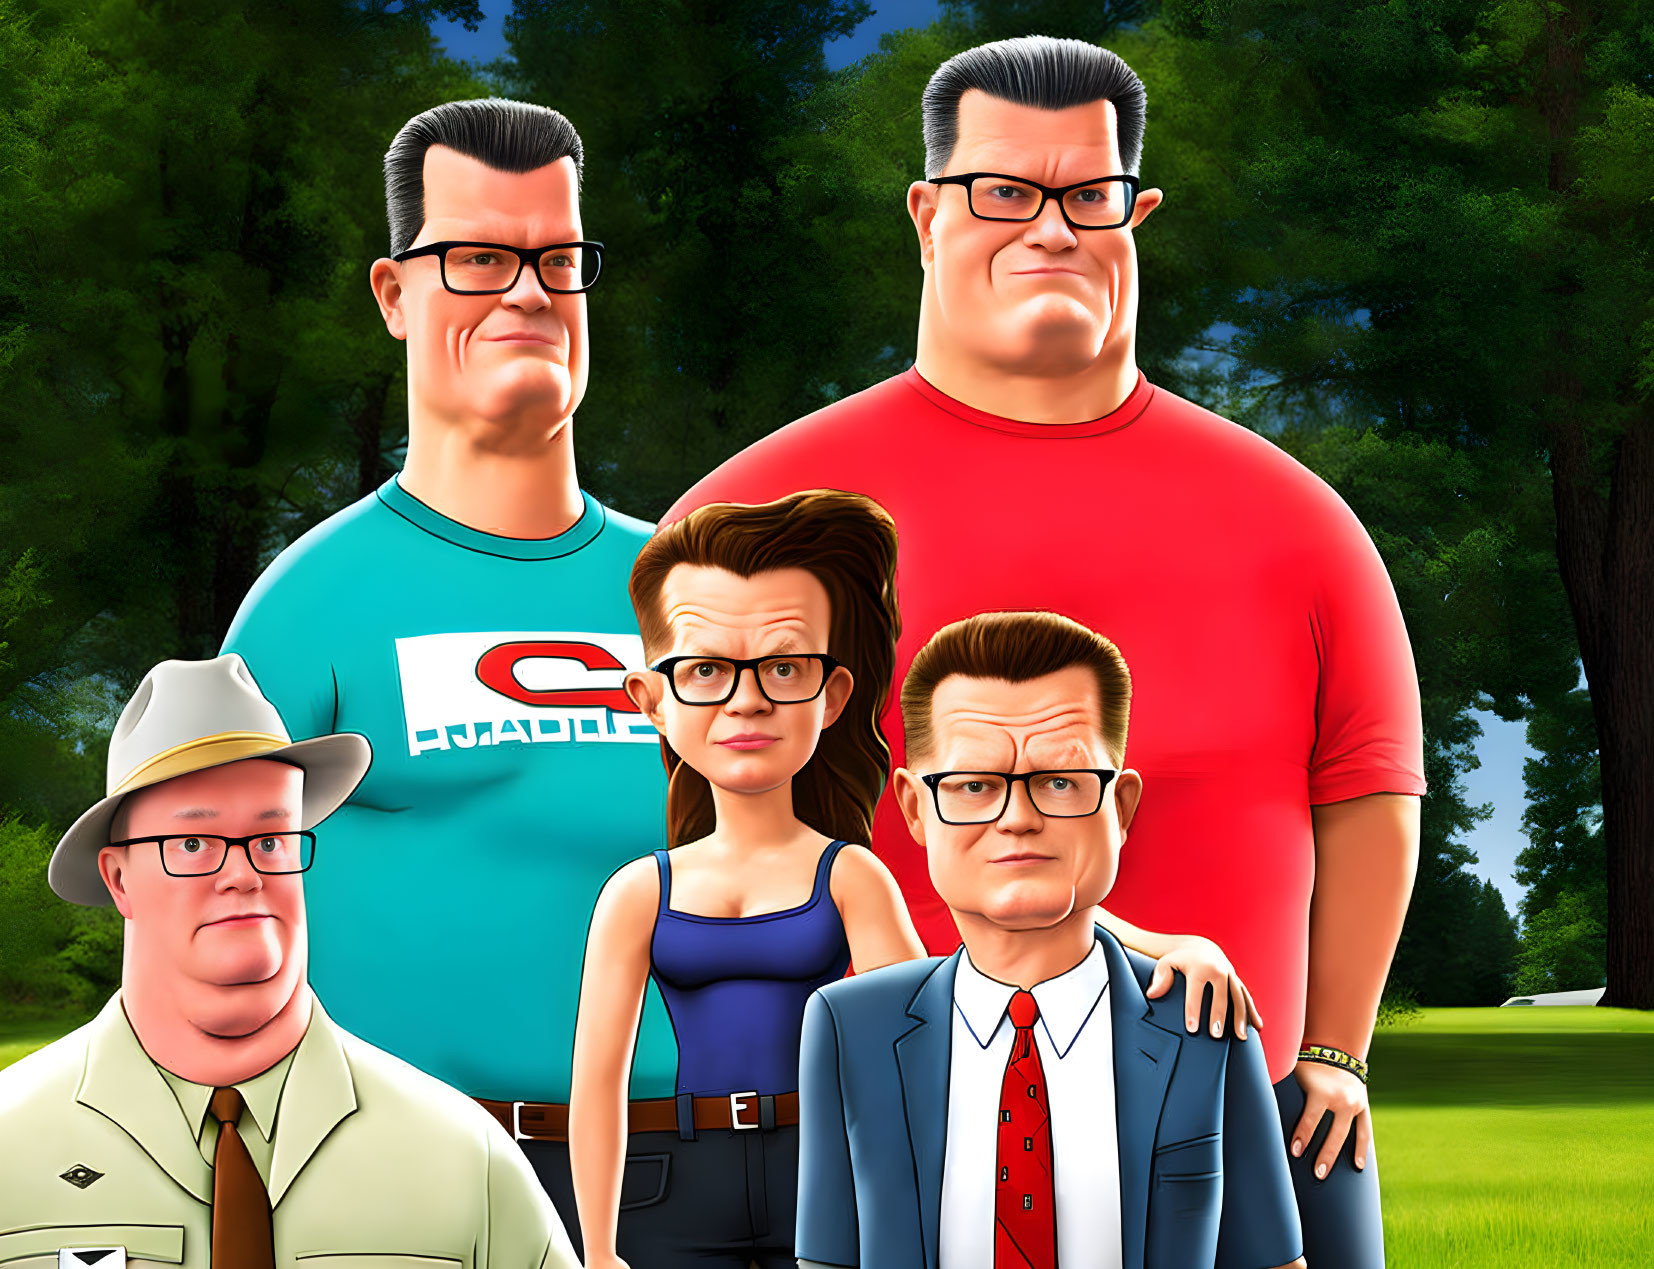 Vibrant cartoon family illustration with colorful characters in park